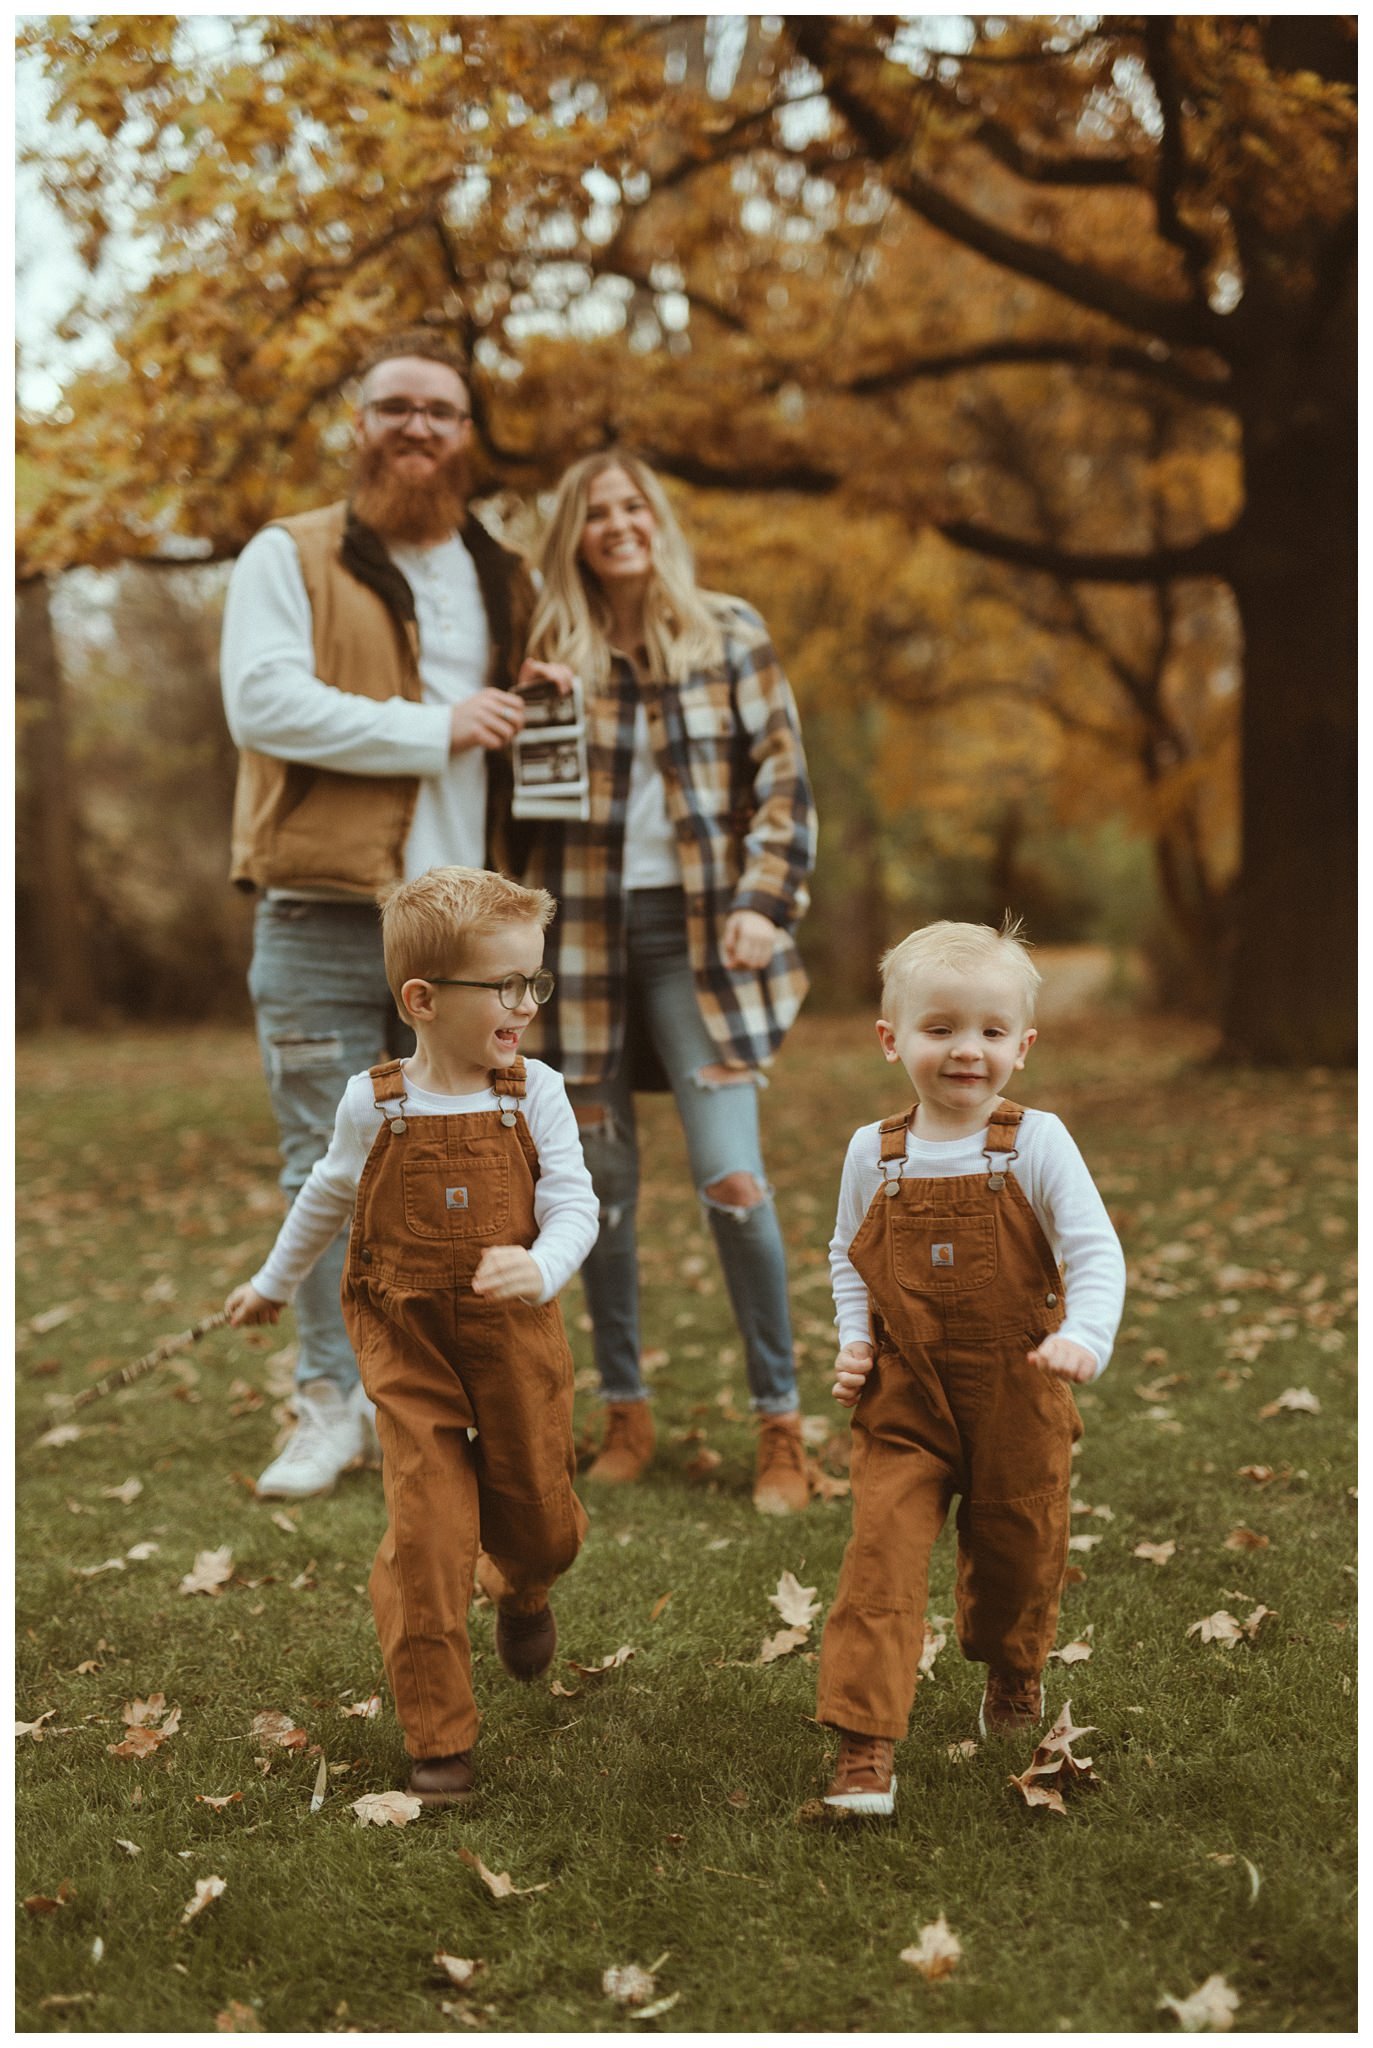 Black Family Fall Family Session and Pregnancy Announcement in Boise, ID at Idaho Fallen Firefighters Memorial Park